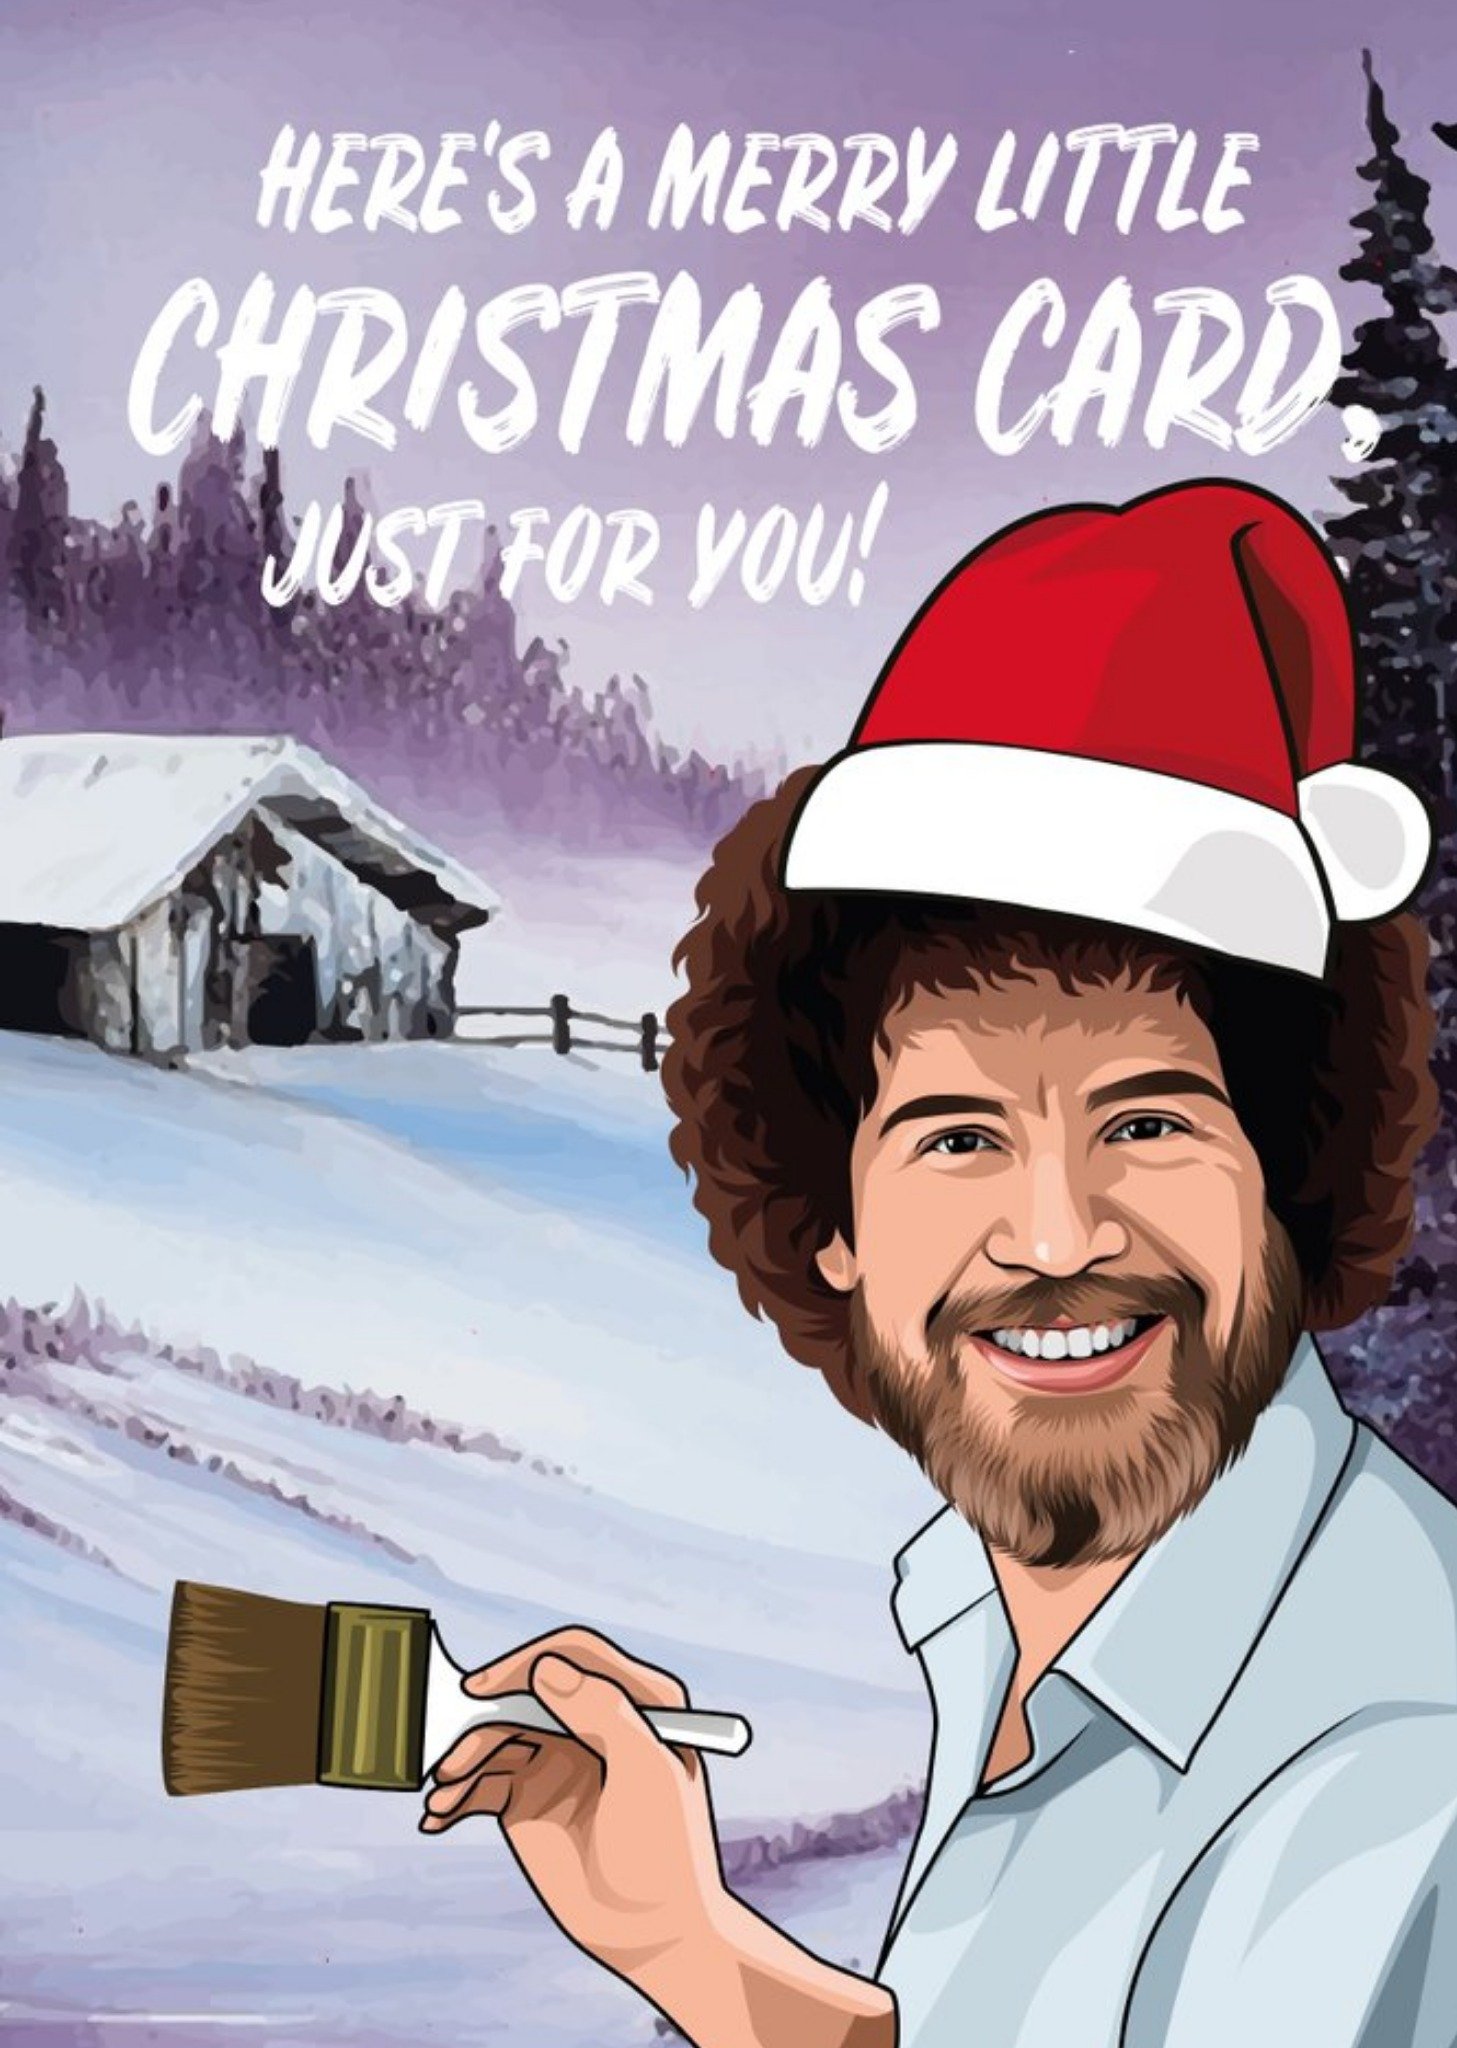 All Things Banter Funny Landscape Painting Just For You Spoof Christmas Card Ecard